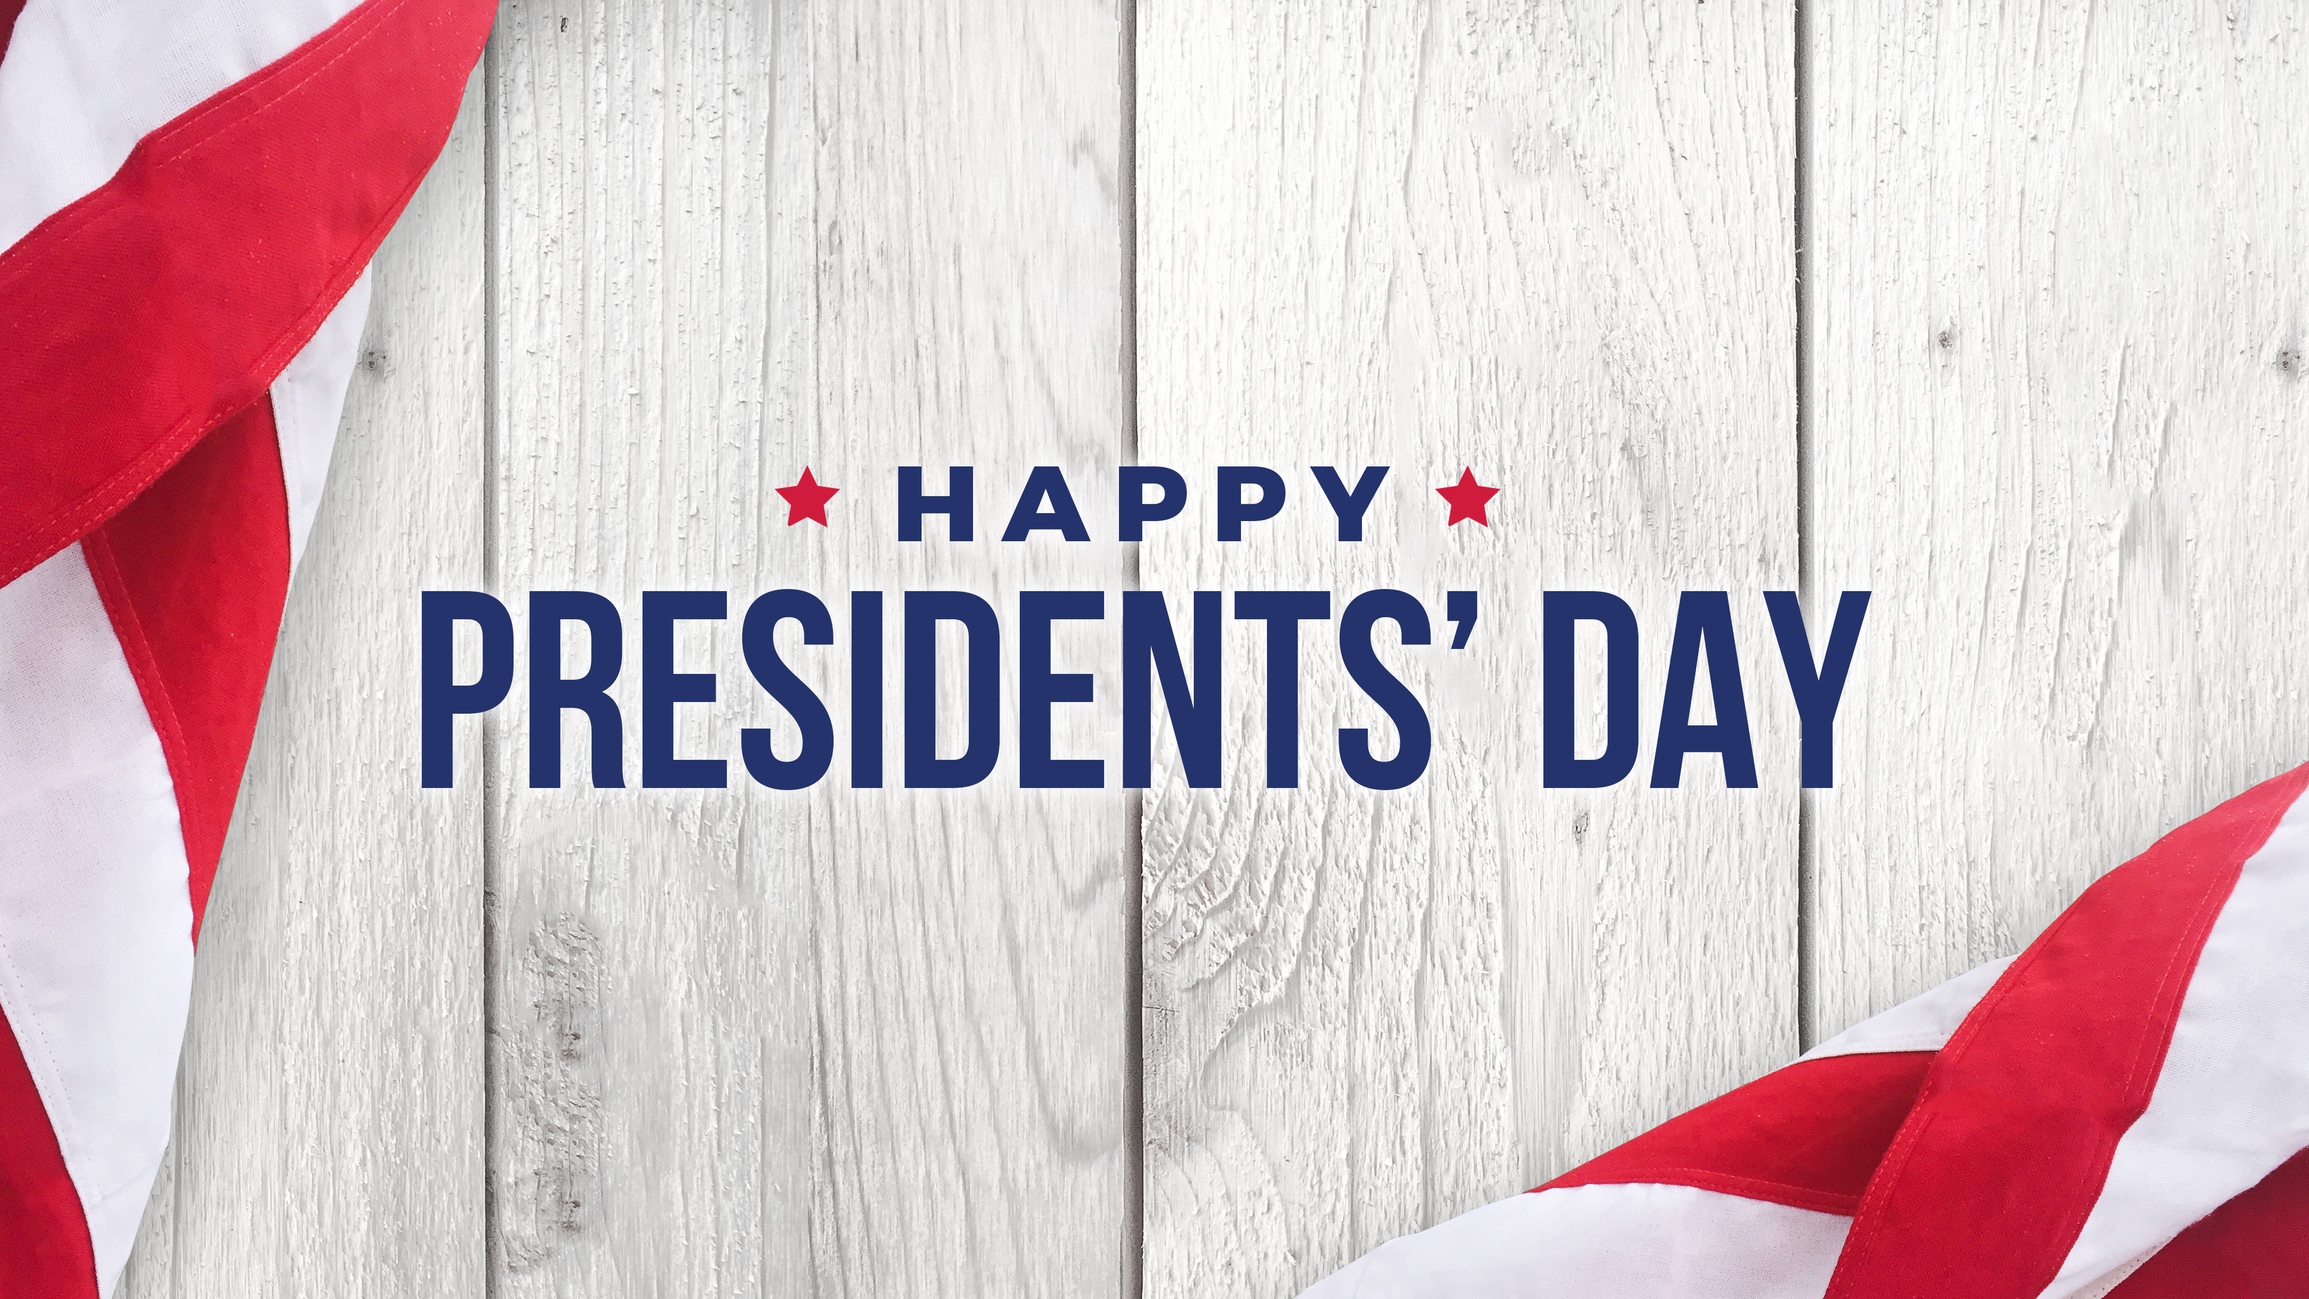 City Offices and Facilities Closed Feb. 19 for Presidents’ Day Holiday ...2309 x 1299